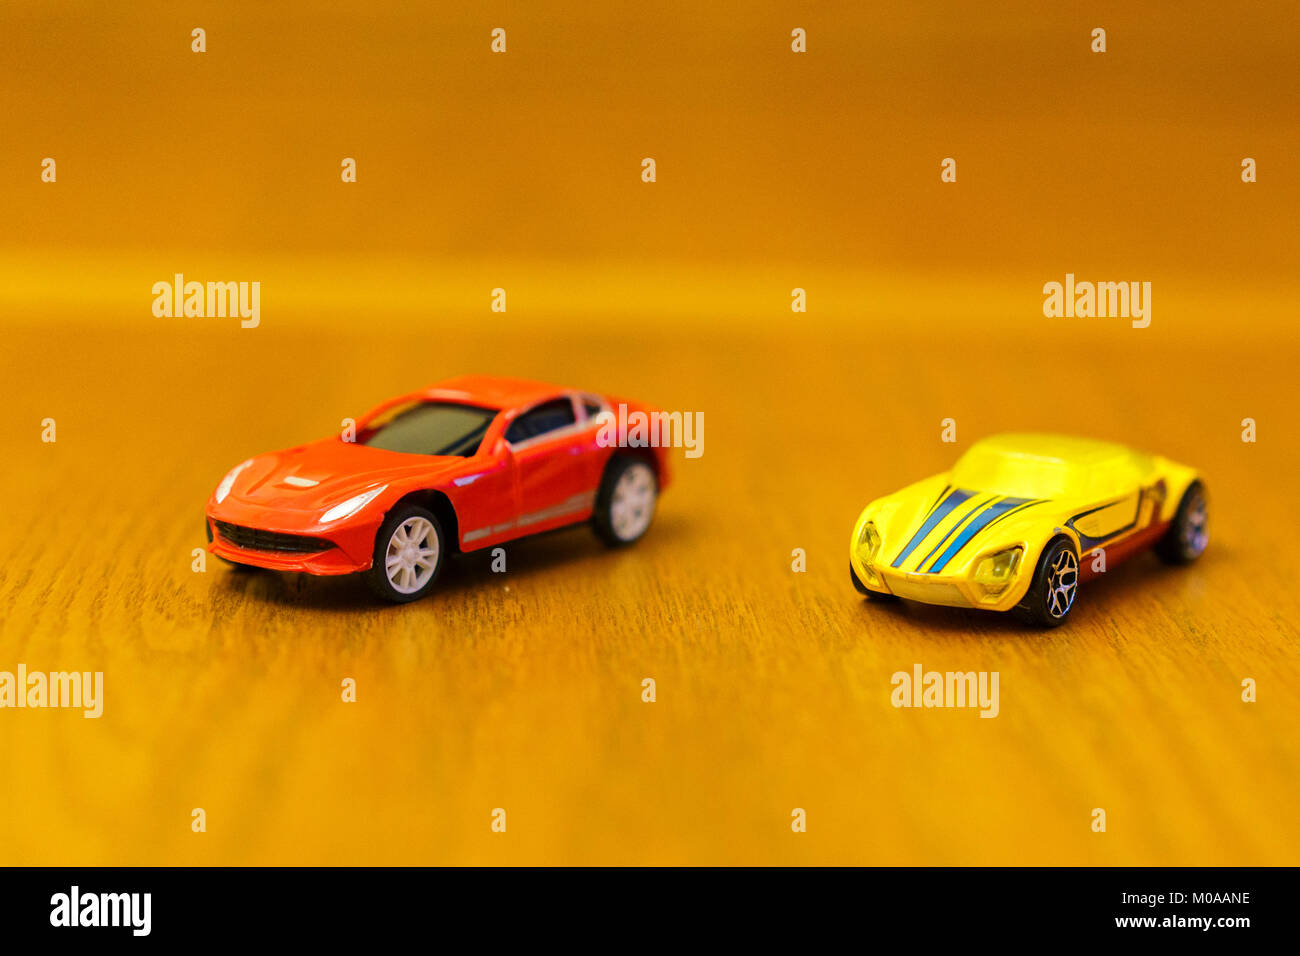 Toy cars red and yellow on a wooden background Stock Photo